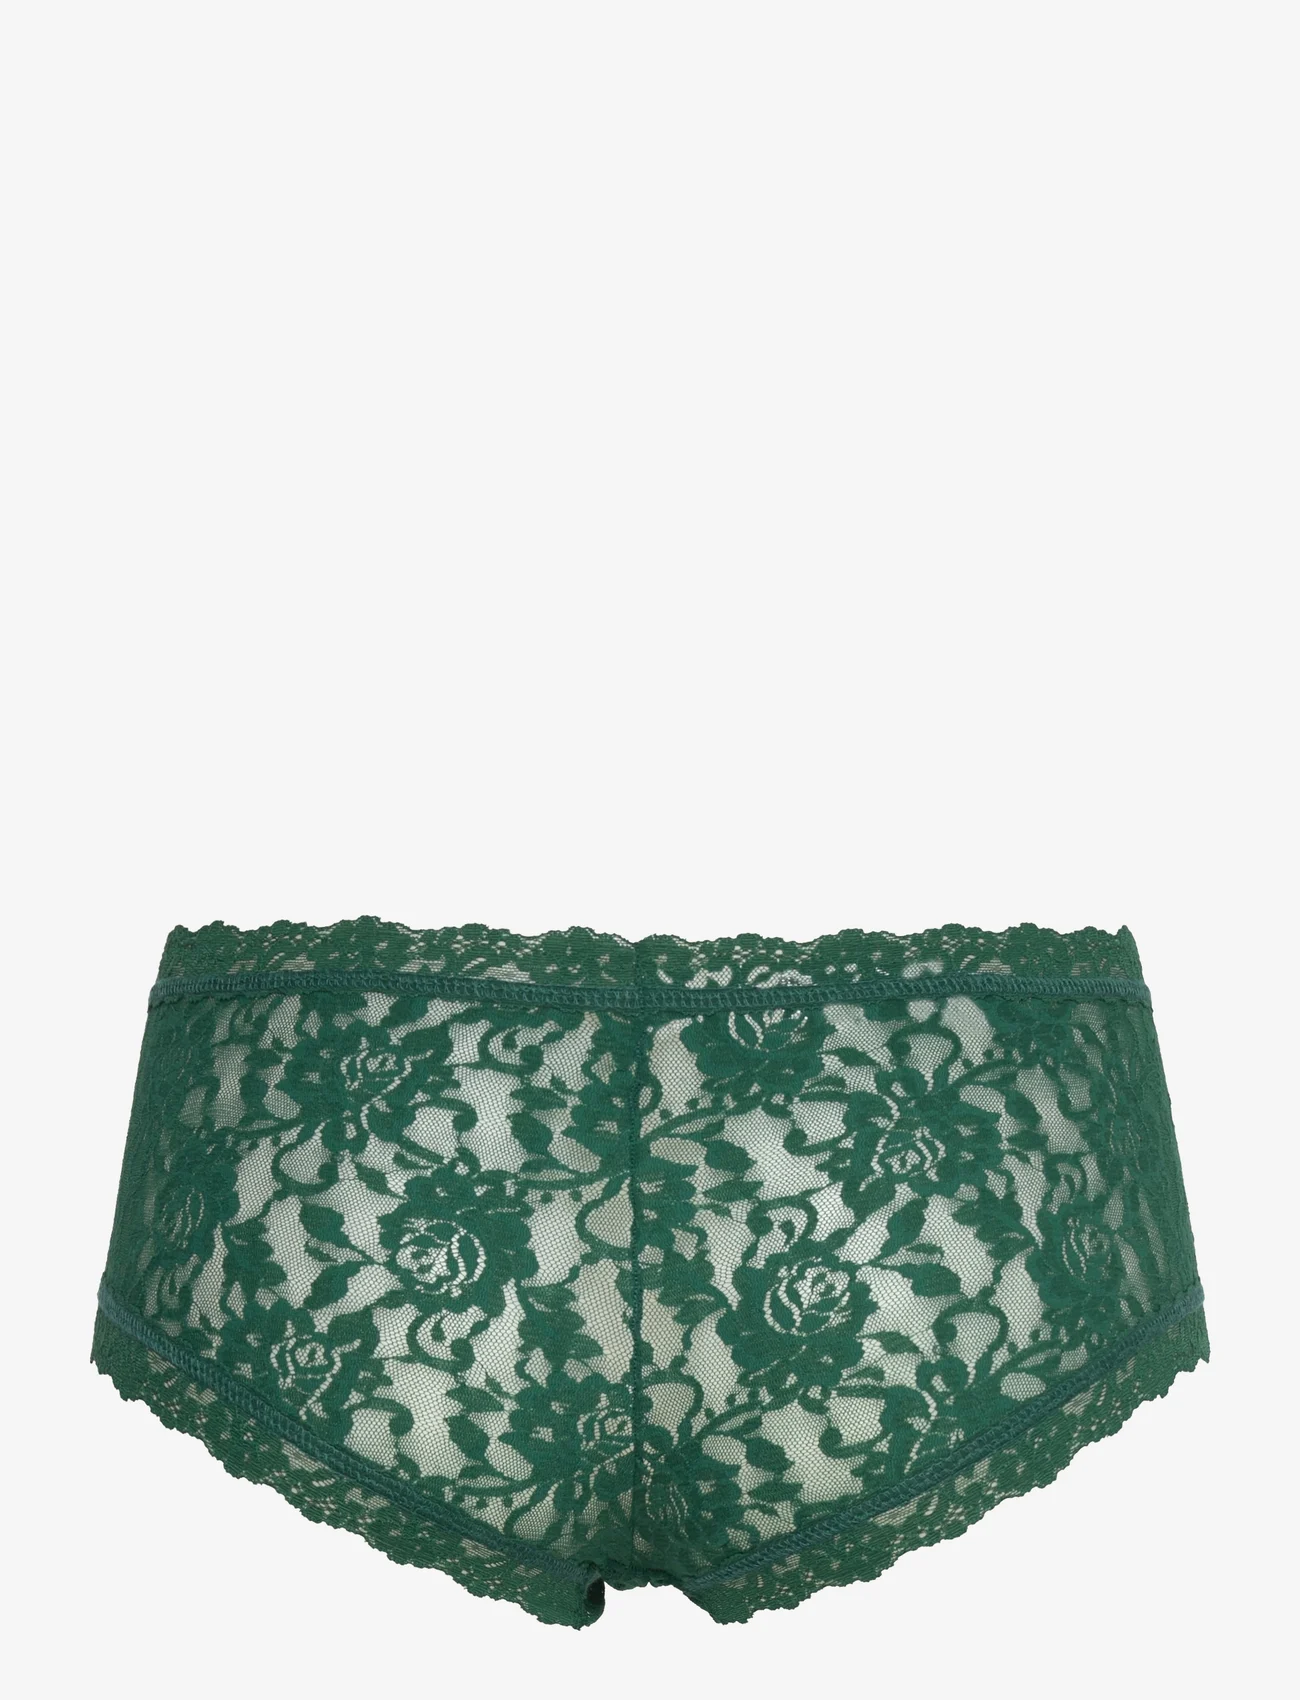 Hanky Panky - Hanky Panky Signature Lace - hipster & hotpants - green queen - 1